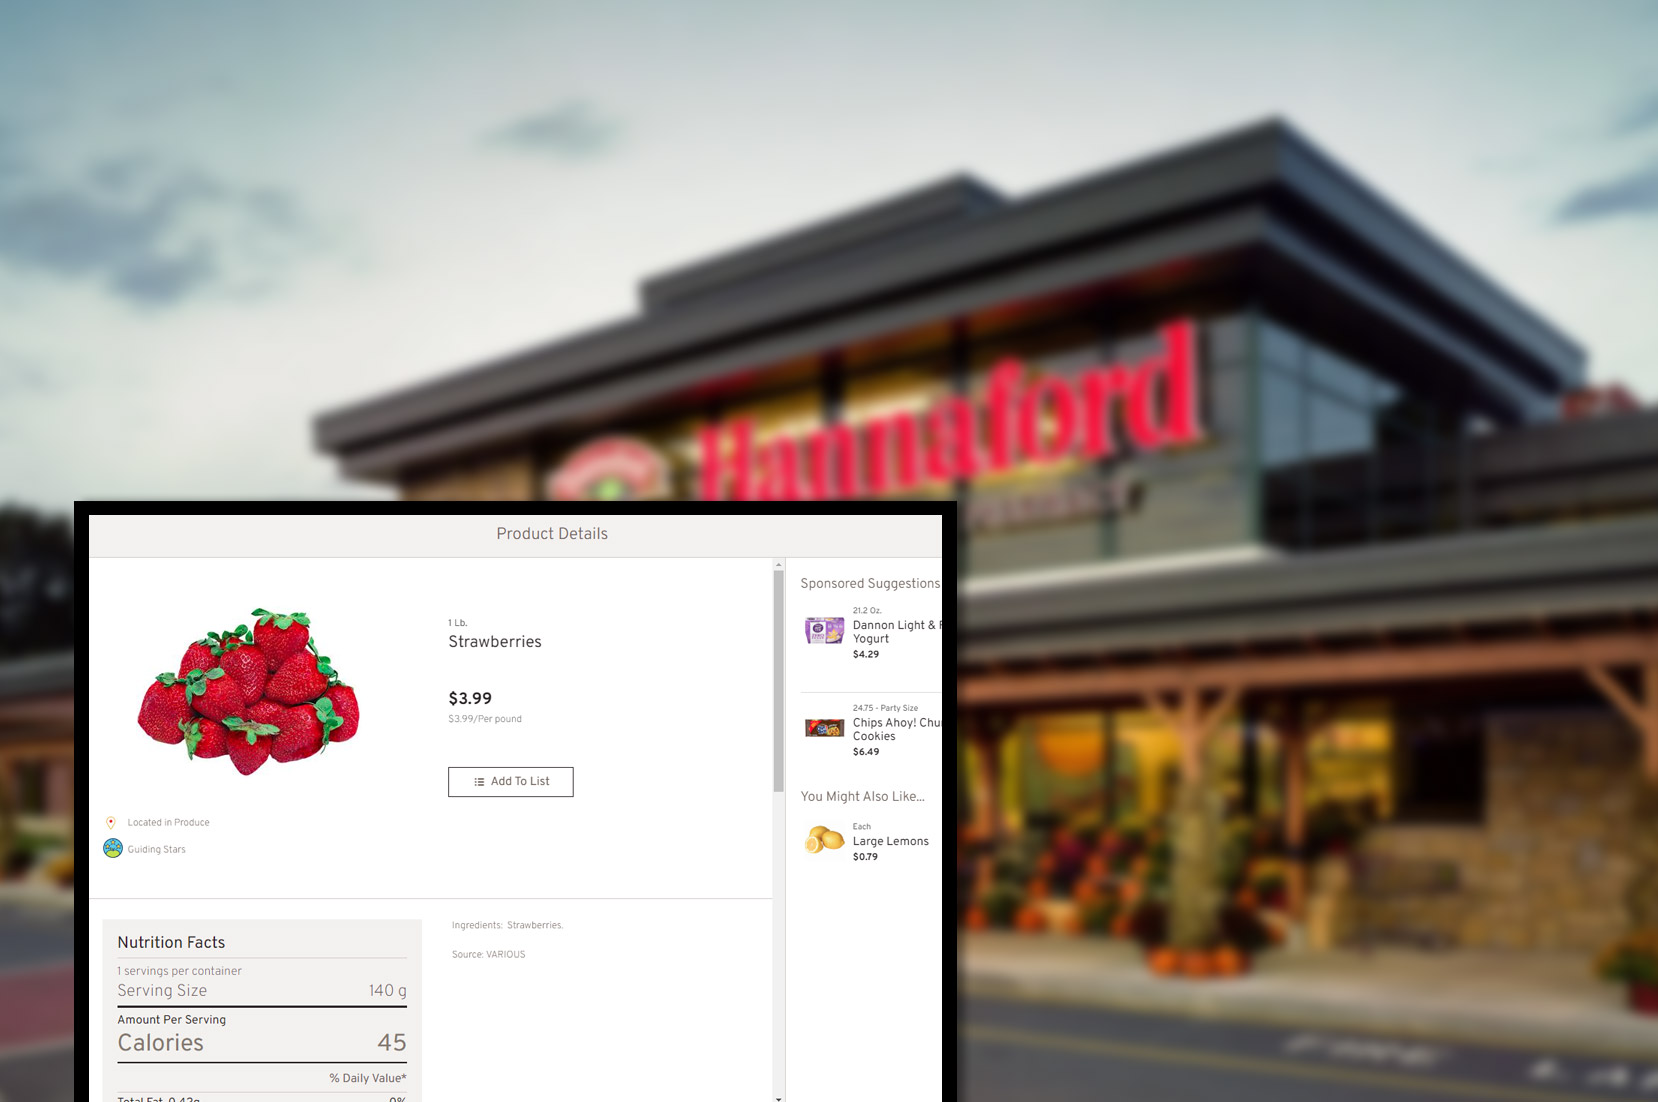 hannaford-comproduct-pricing-information-and-image-scraping-services